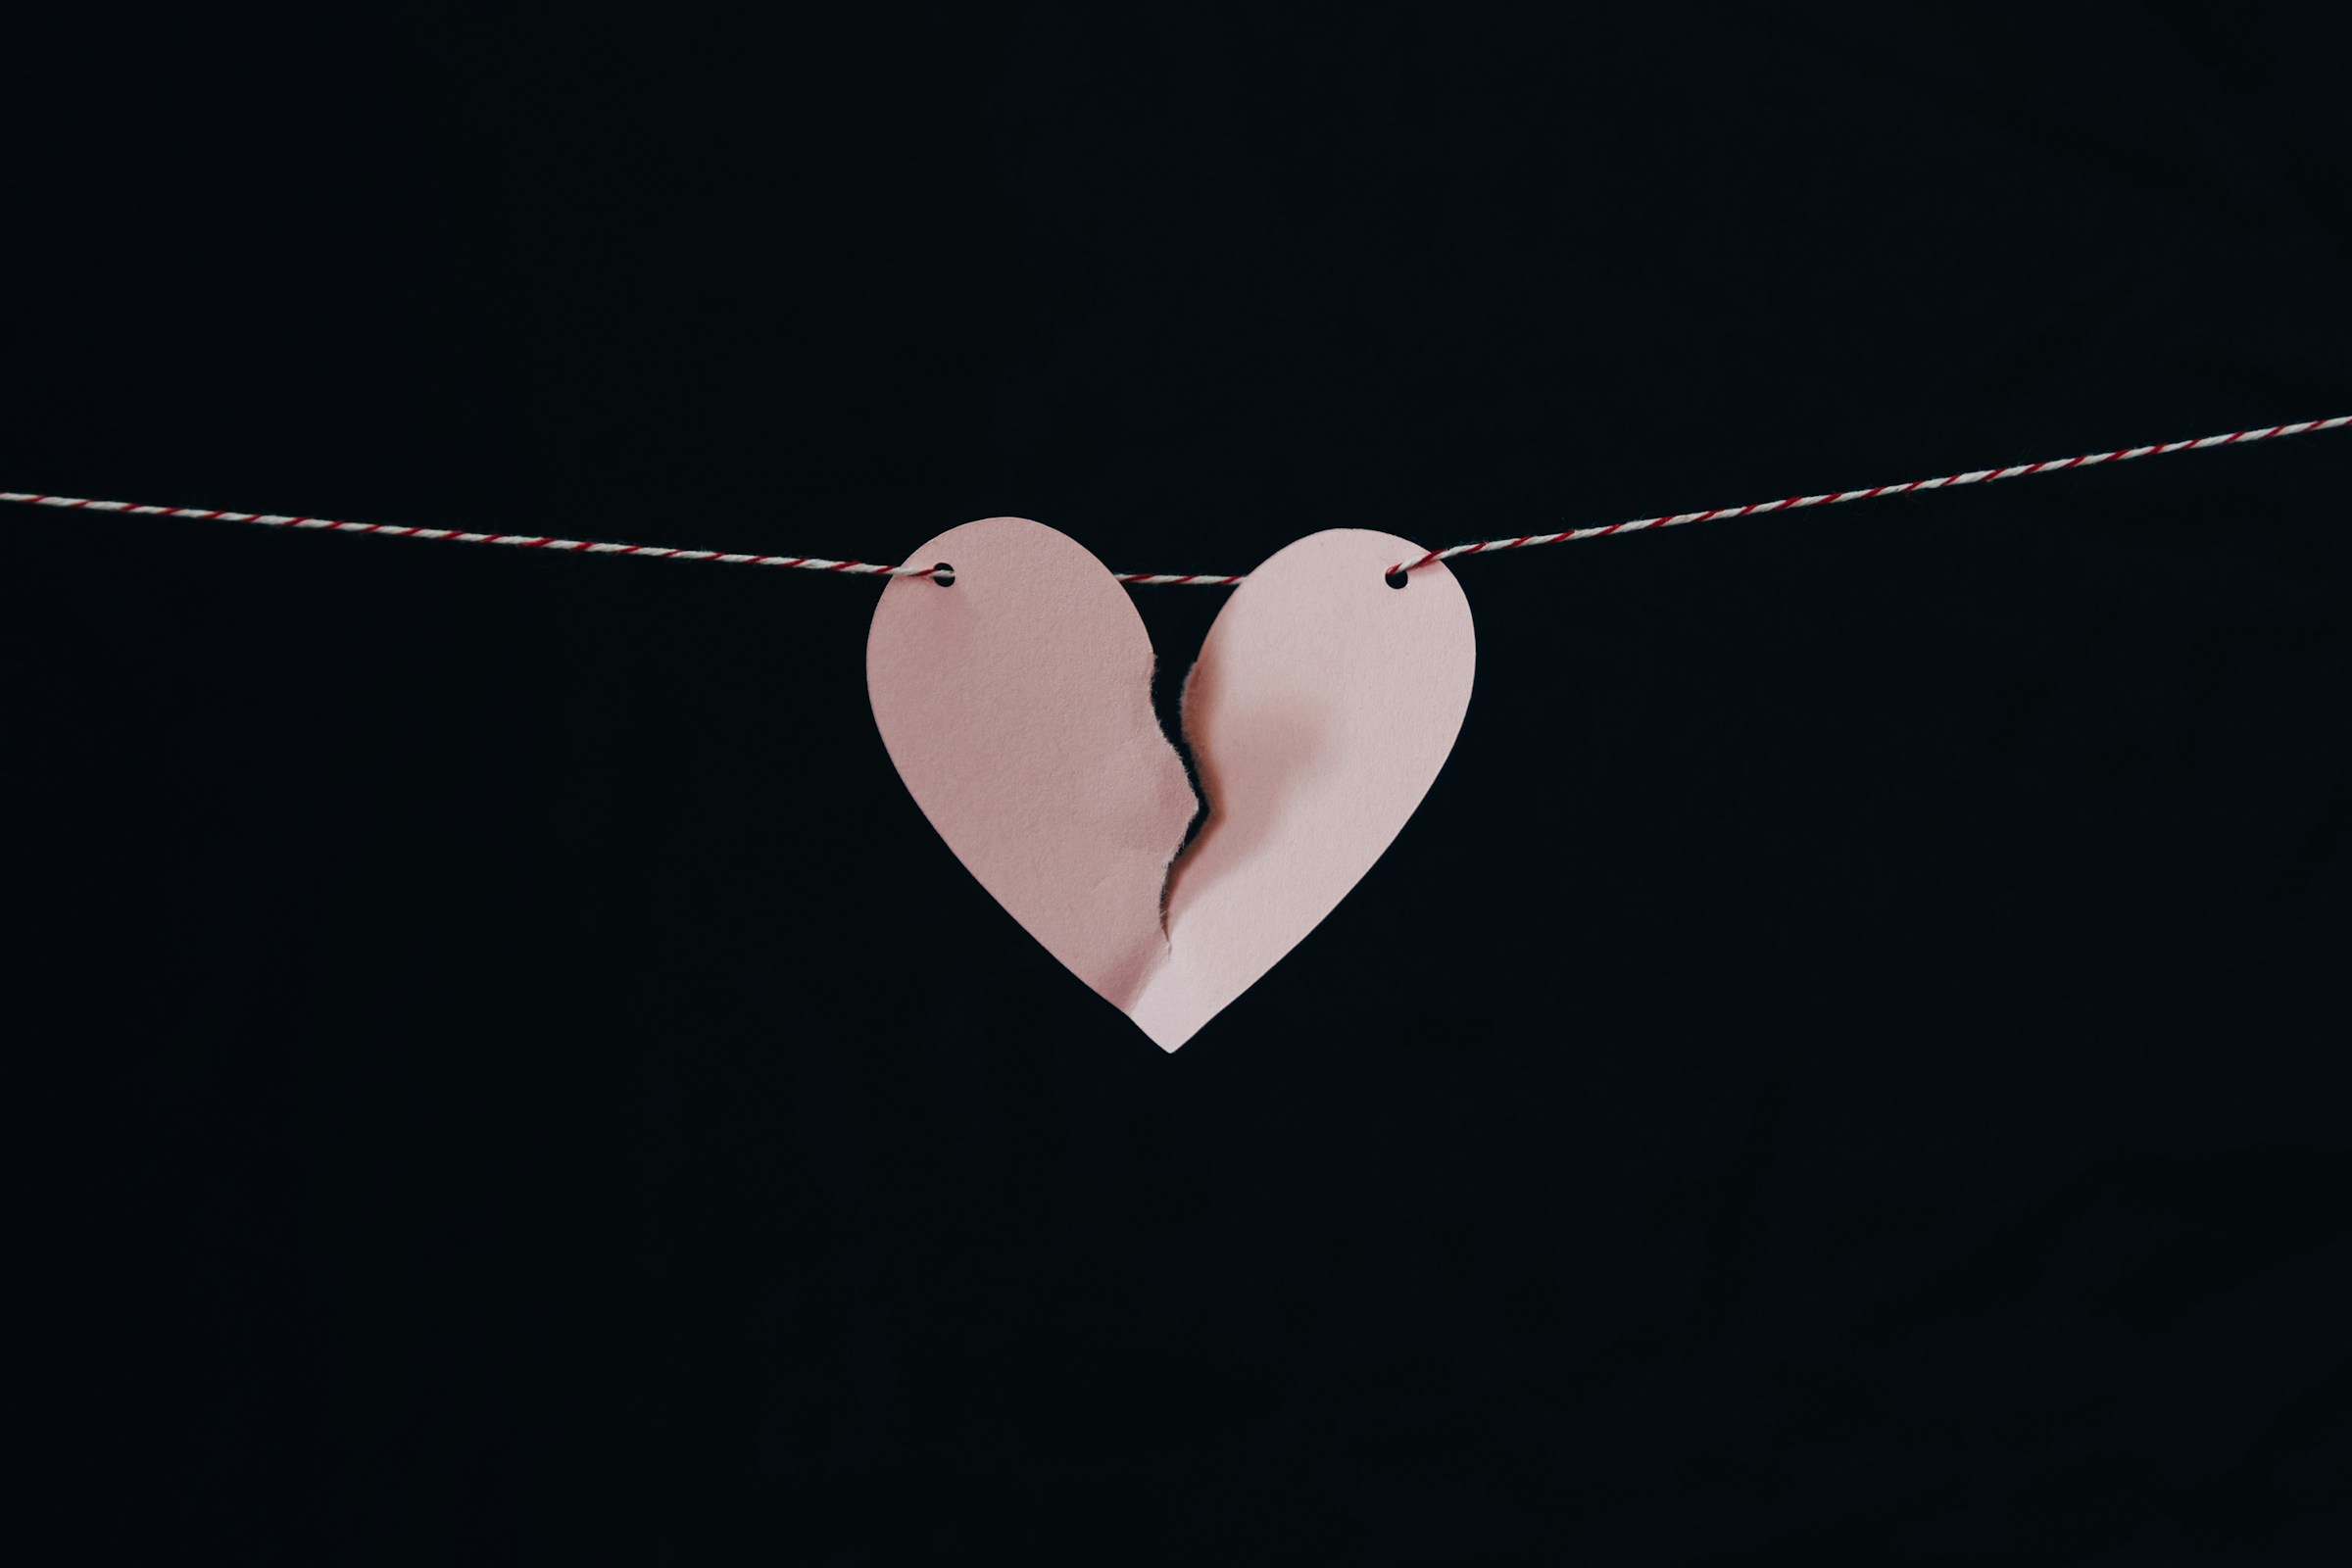 A broken heart hanging on a wire | Source: Pexels